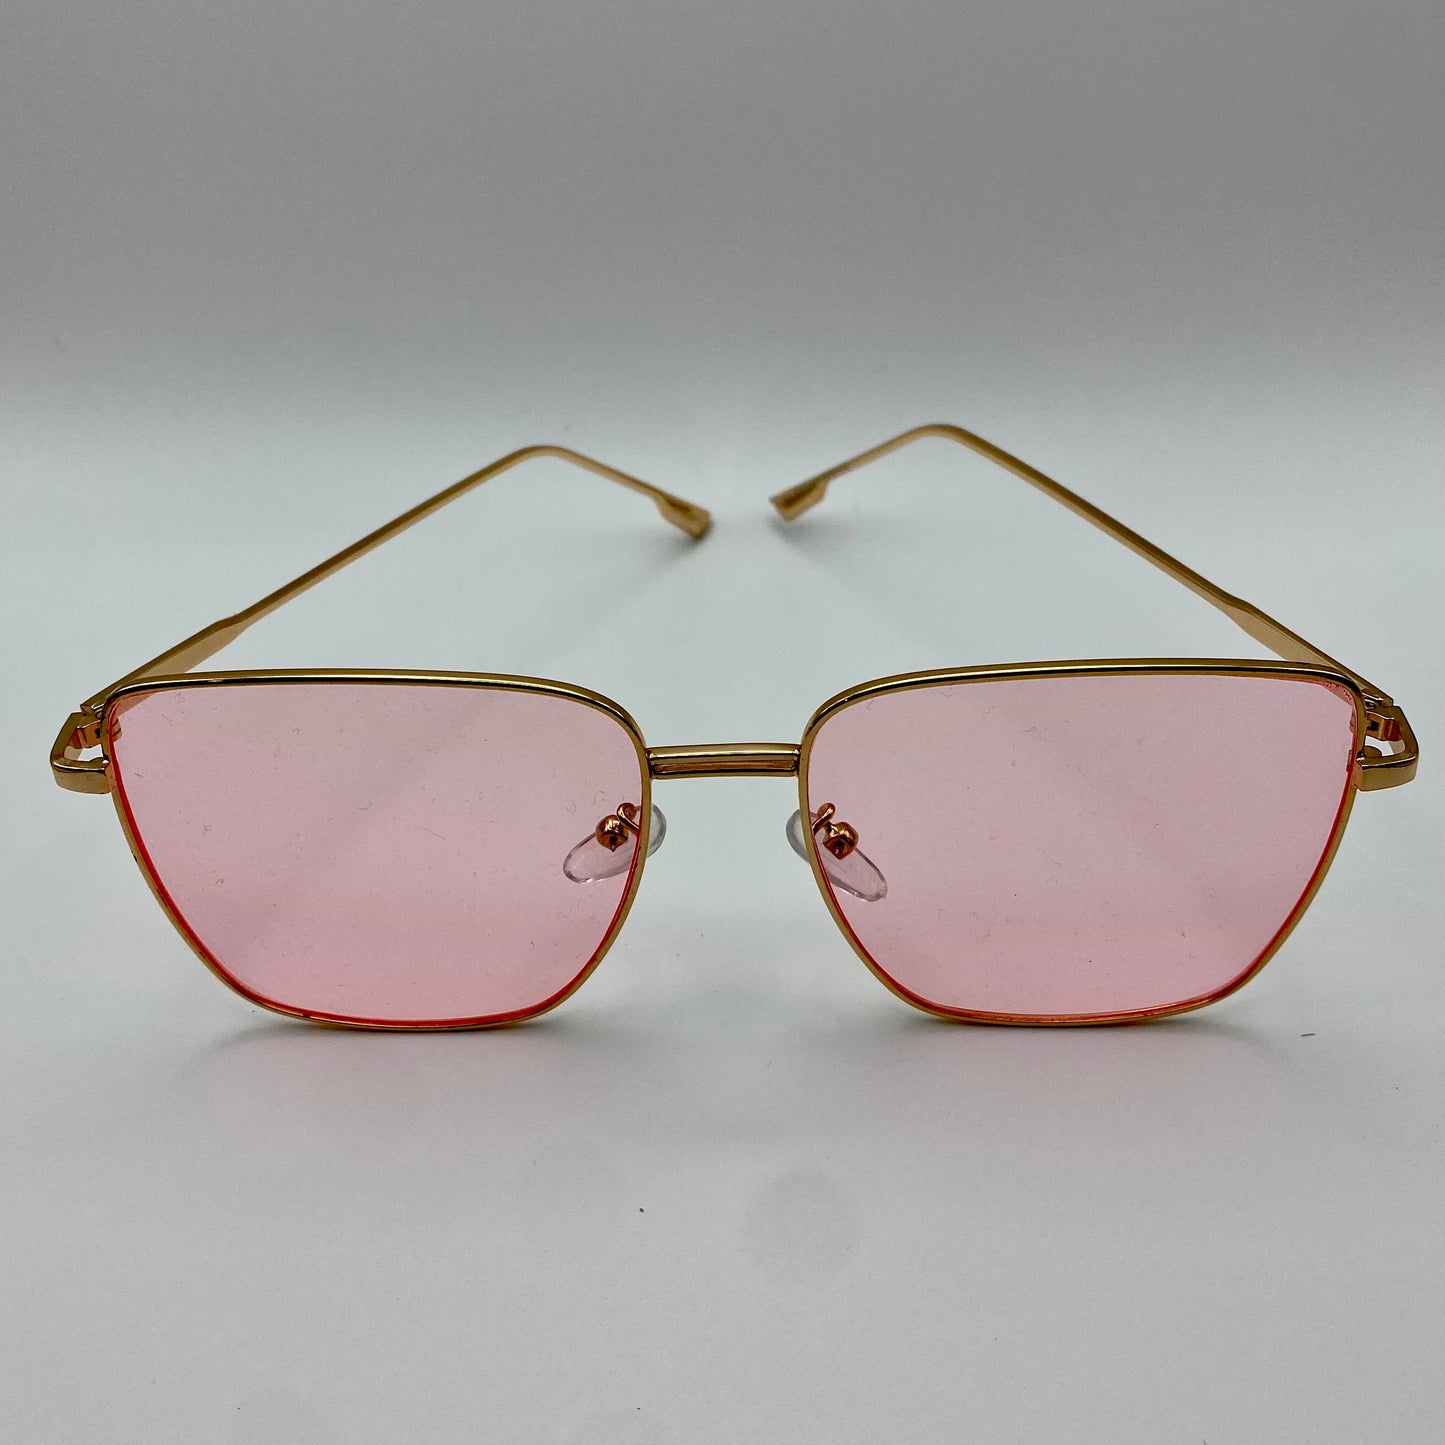 Classic Square Oversized Tinted Fashion Glasses - Pink